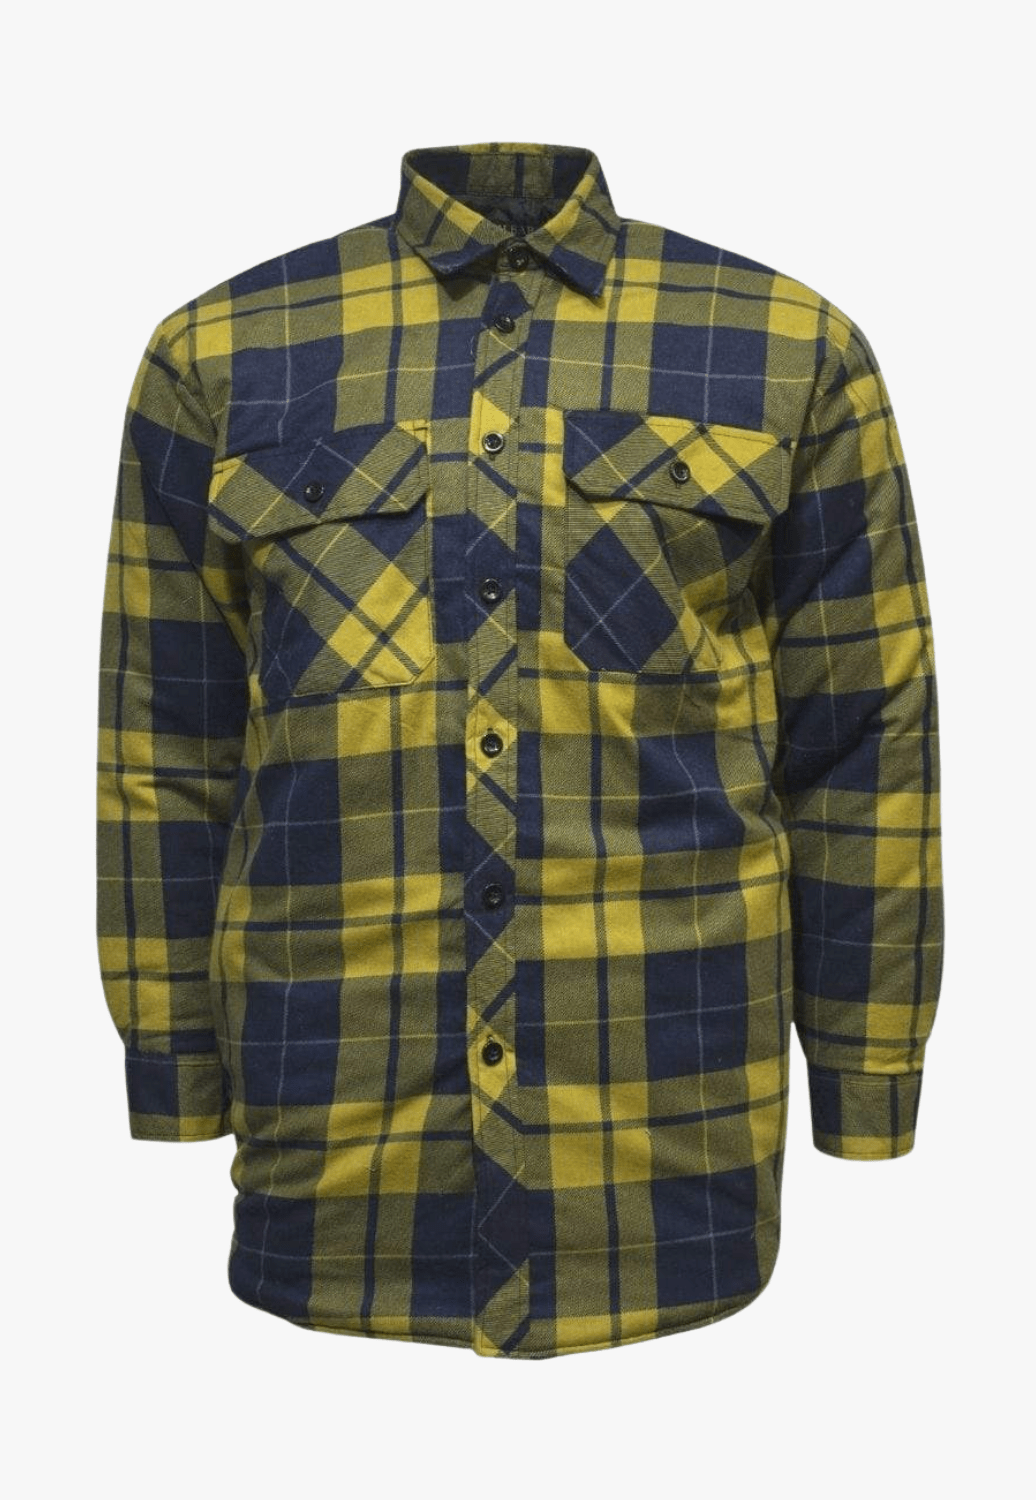 Ritemate WORKWEAR - Mens Jackets Ritemate Flannelette Quilted Shirt RM123QS